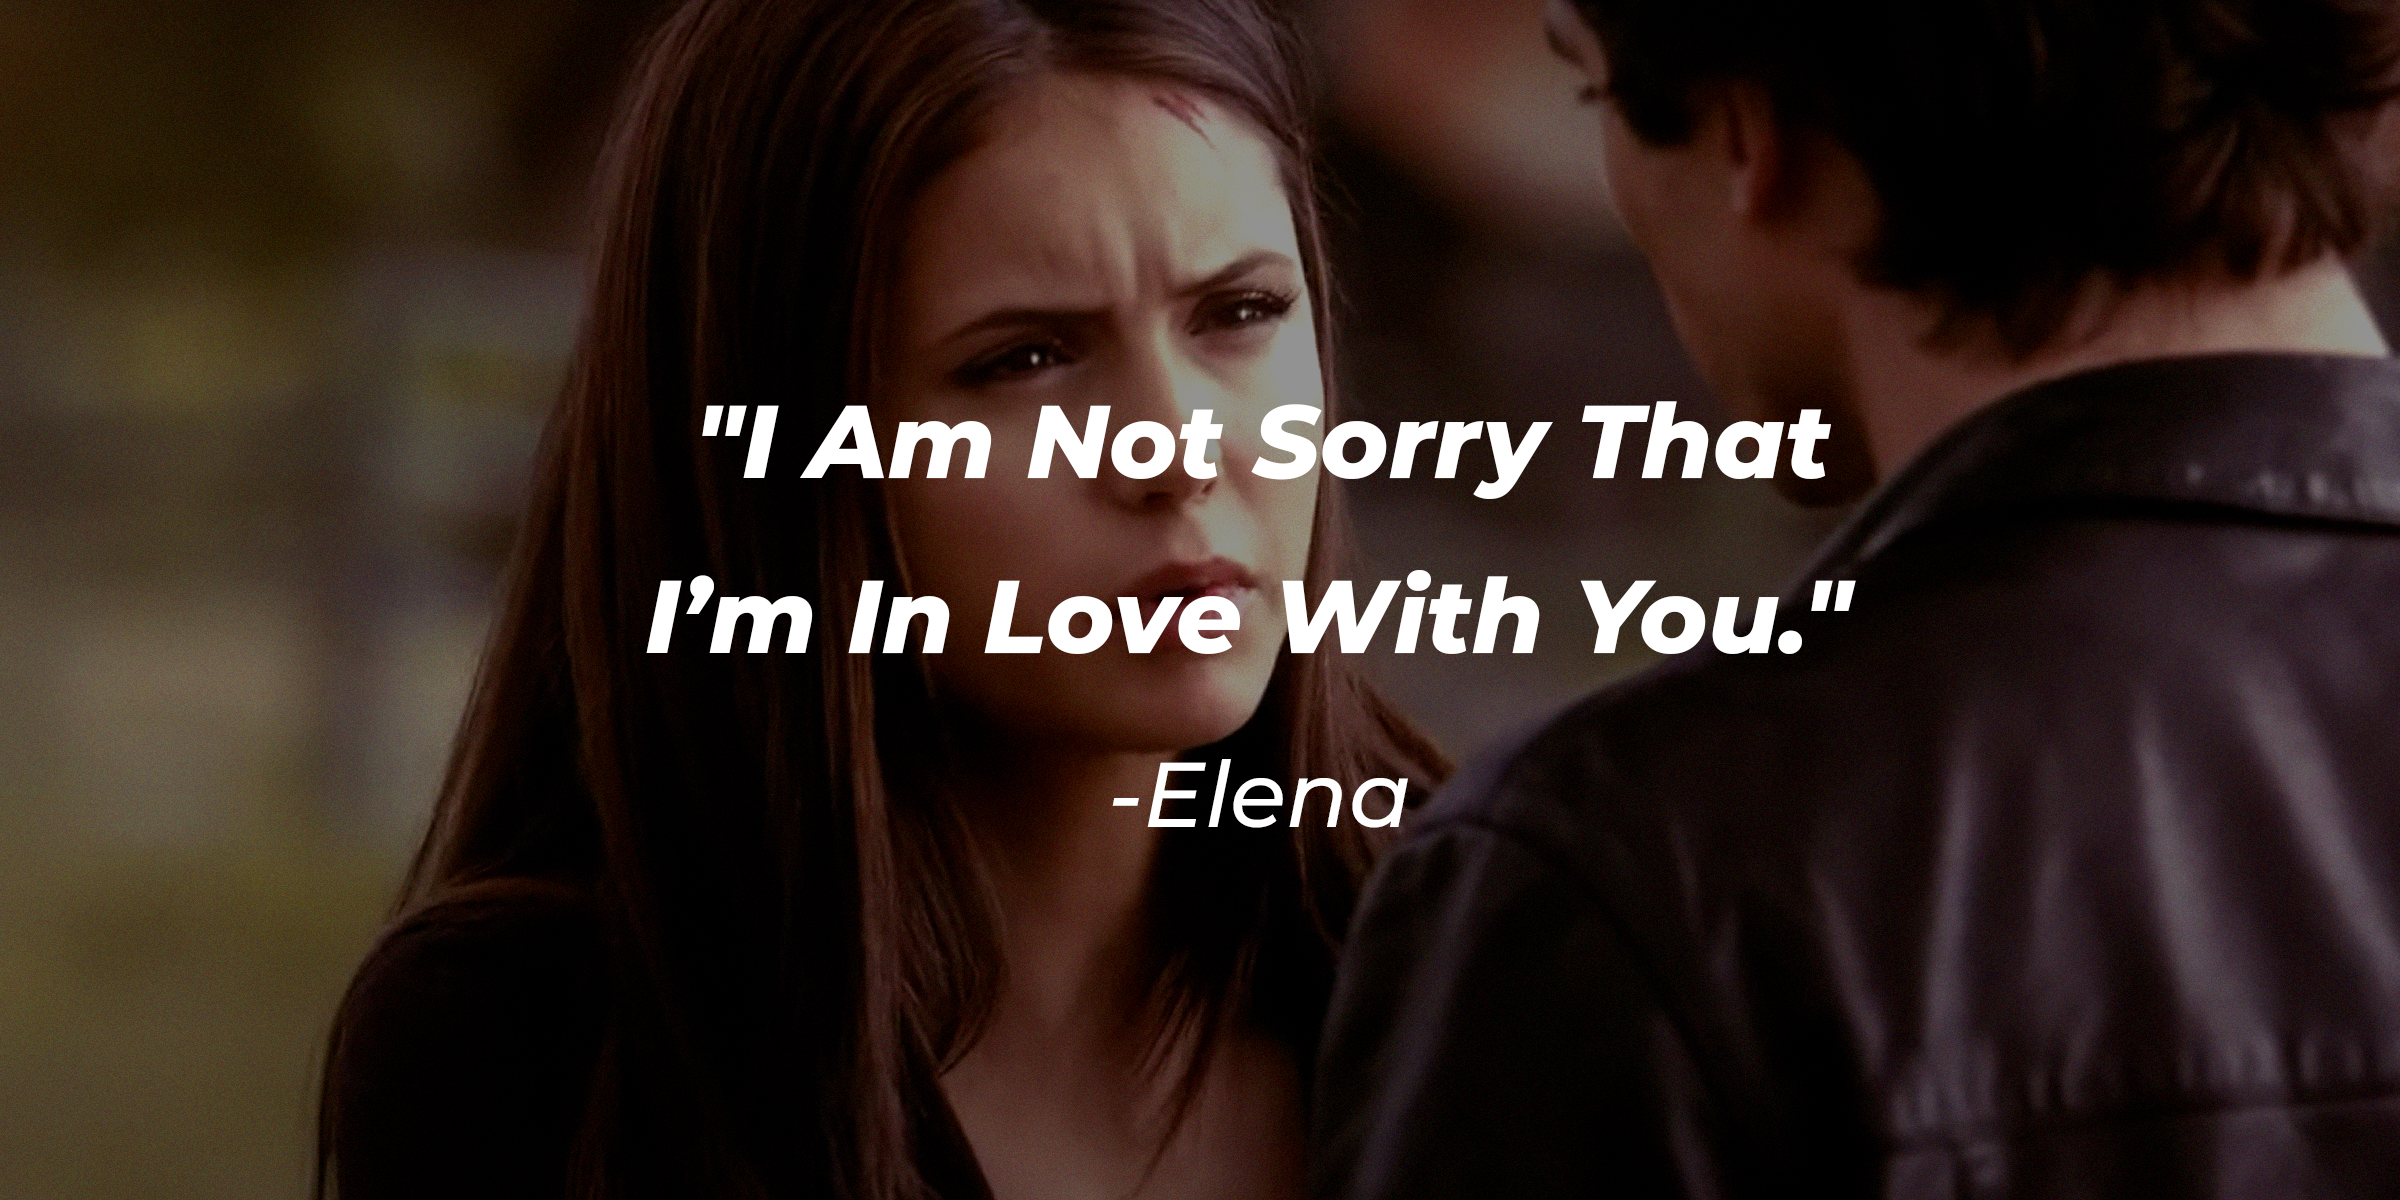 Elena with her quote: "I Am Not Sorry That I'm In Love With You." | Source: facebook.com/thevampirediaries